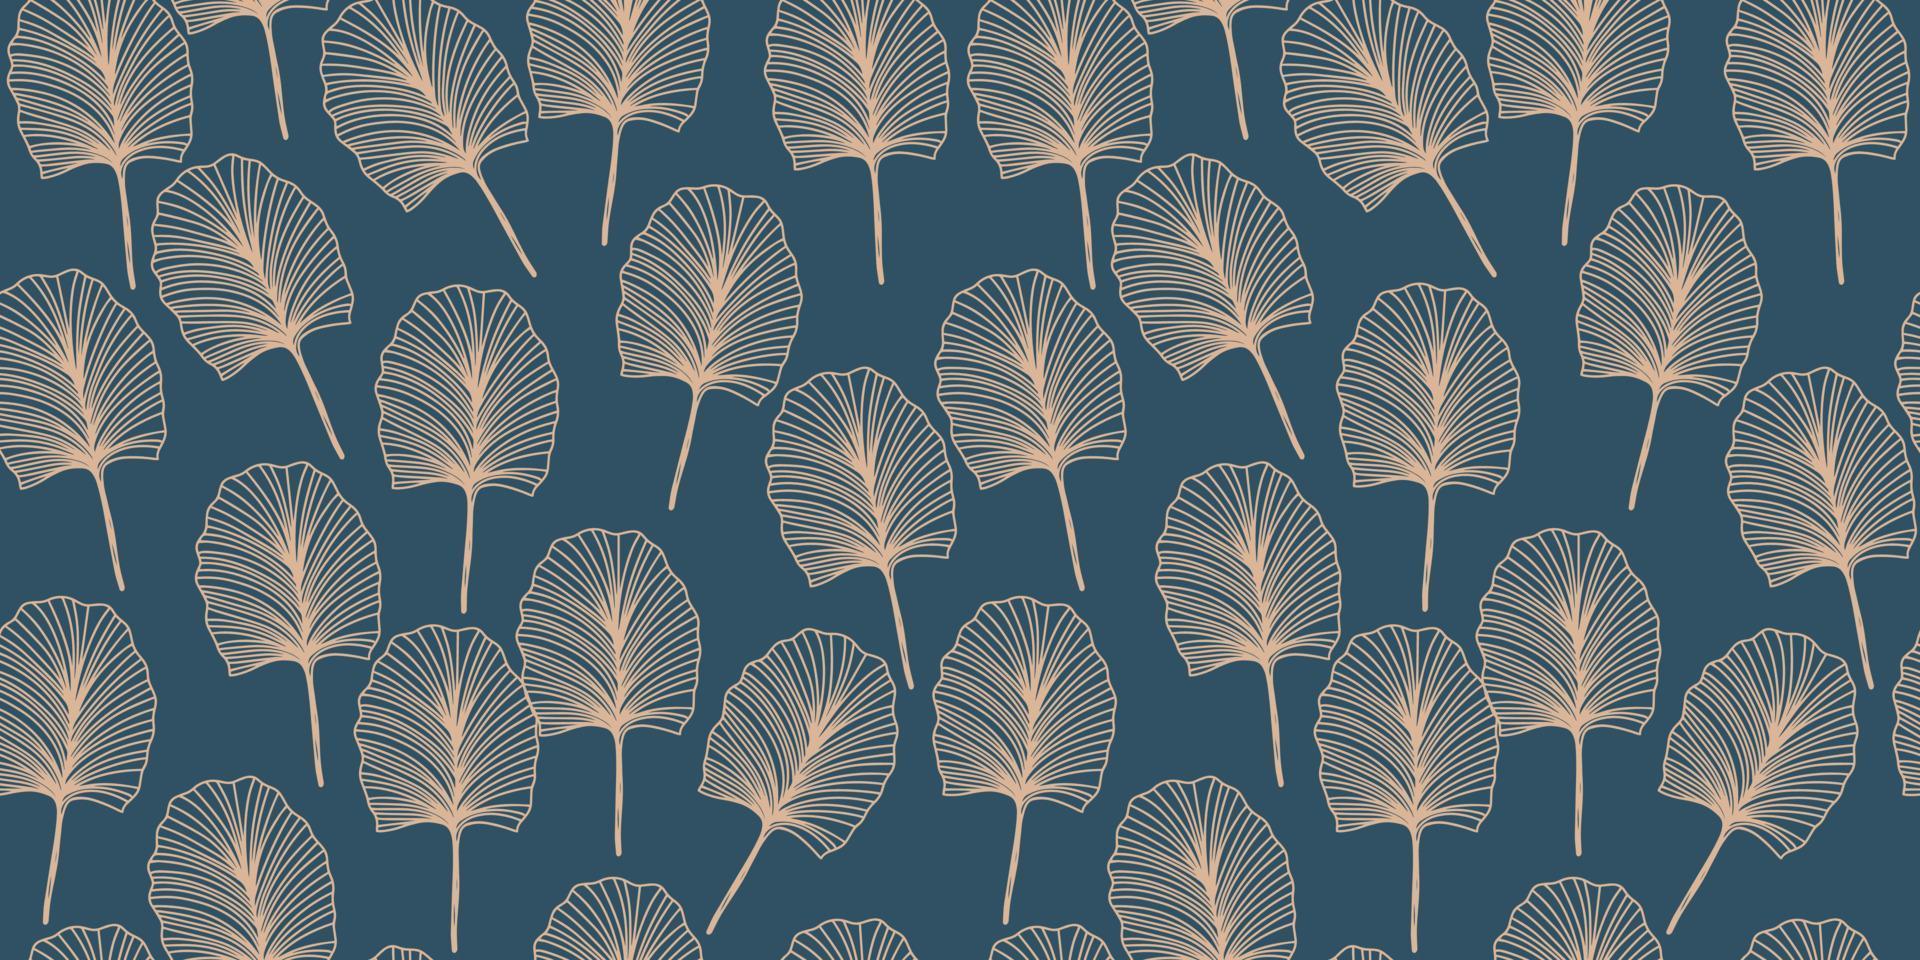 Japanese style pattern with linear burdock on dark blue background vector